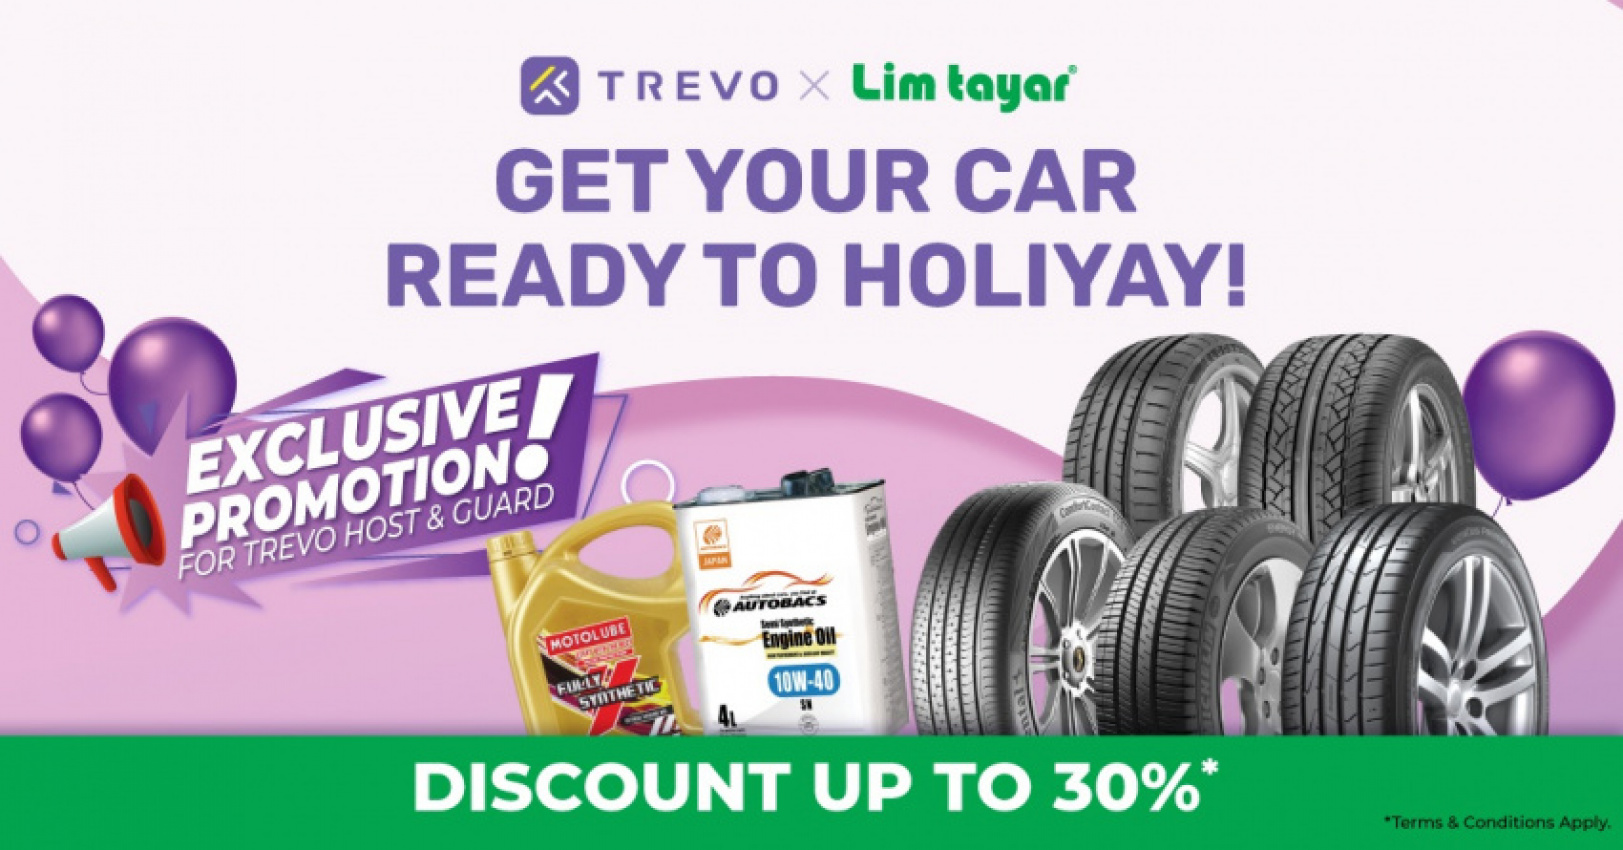 autos, cars, featured, car sharing, insurance, lim tayar, malaysia, trevo, trevo partners lim tayar to offer deals on tyres and lubricants